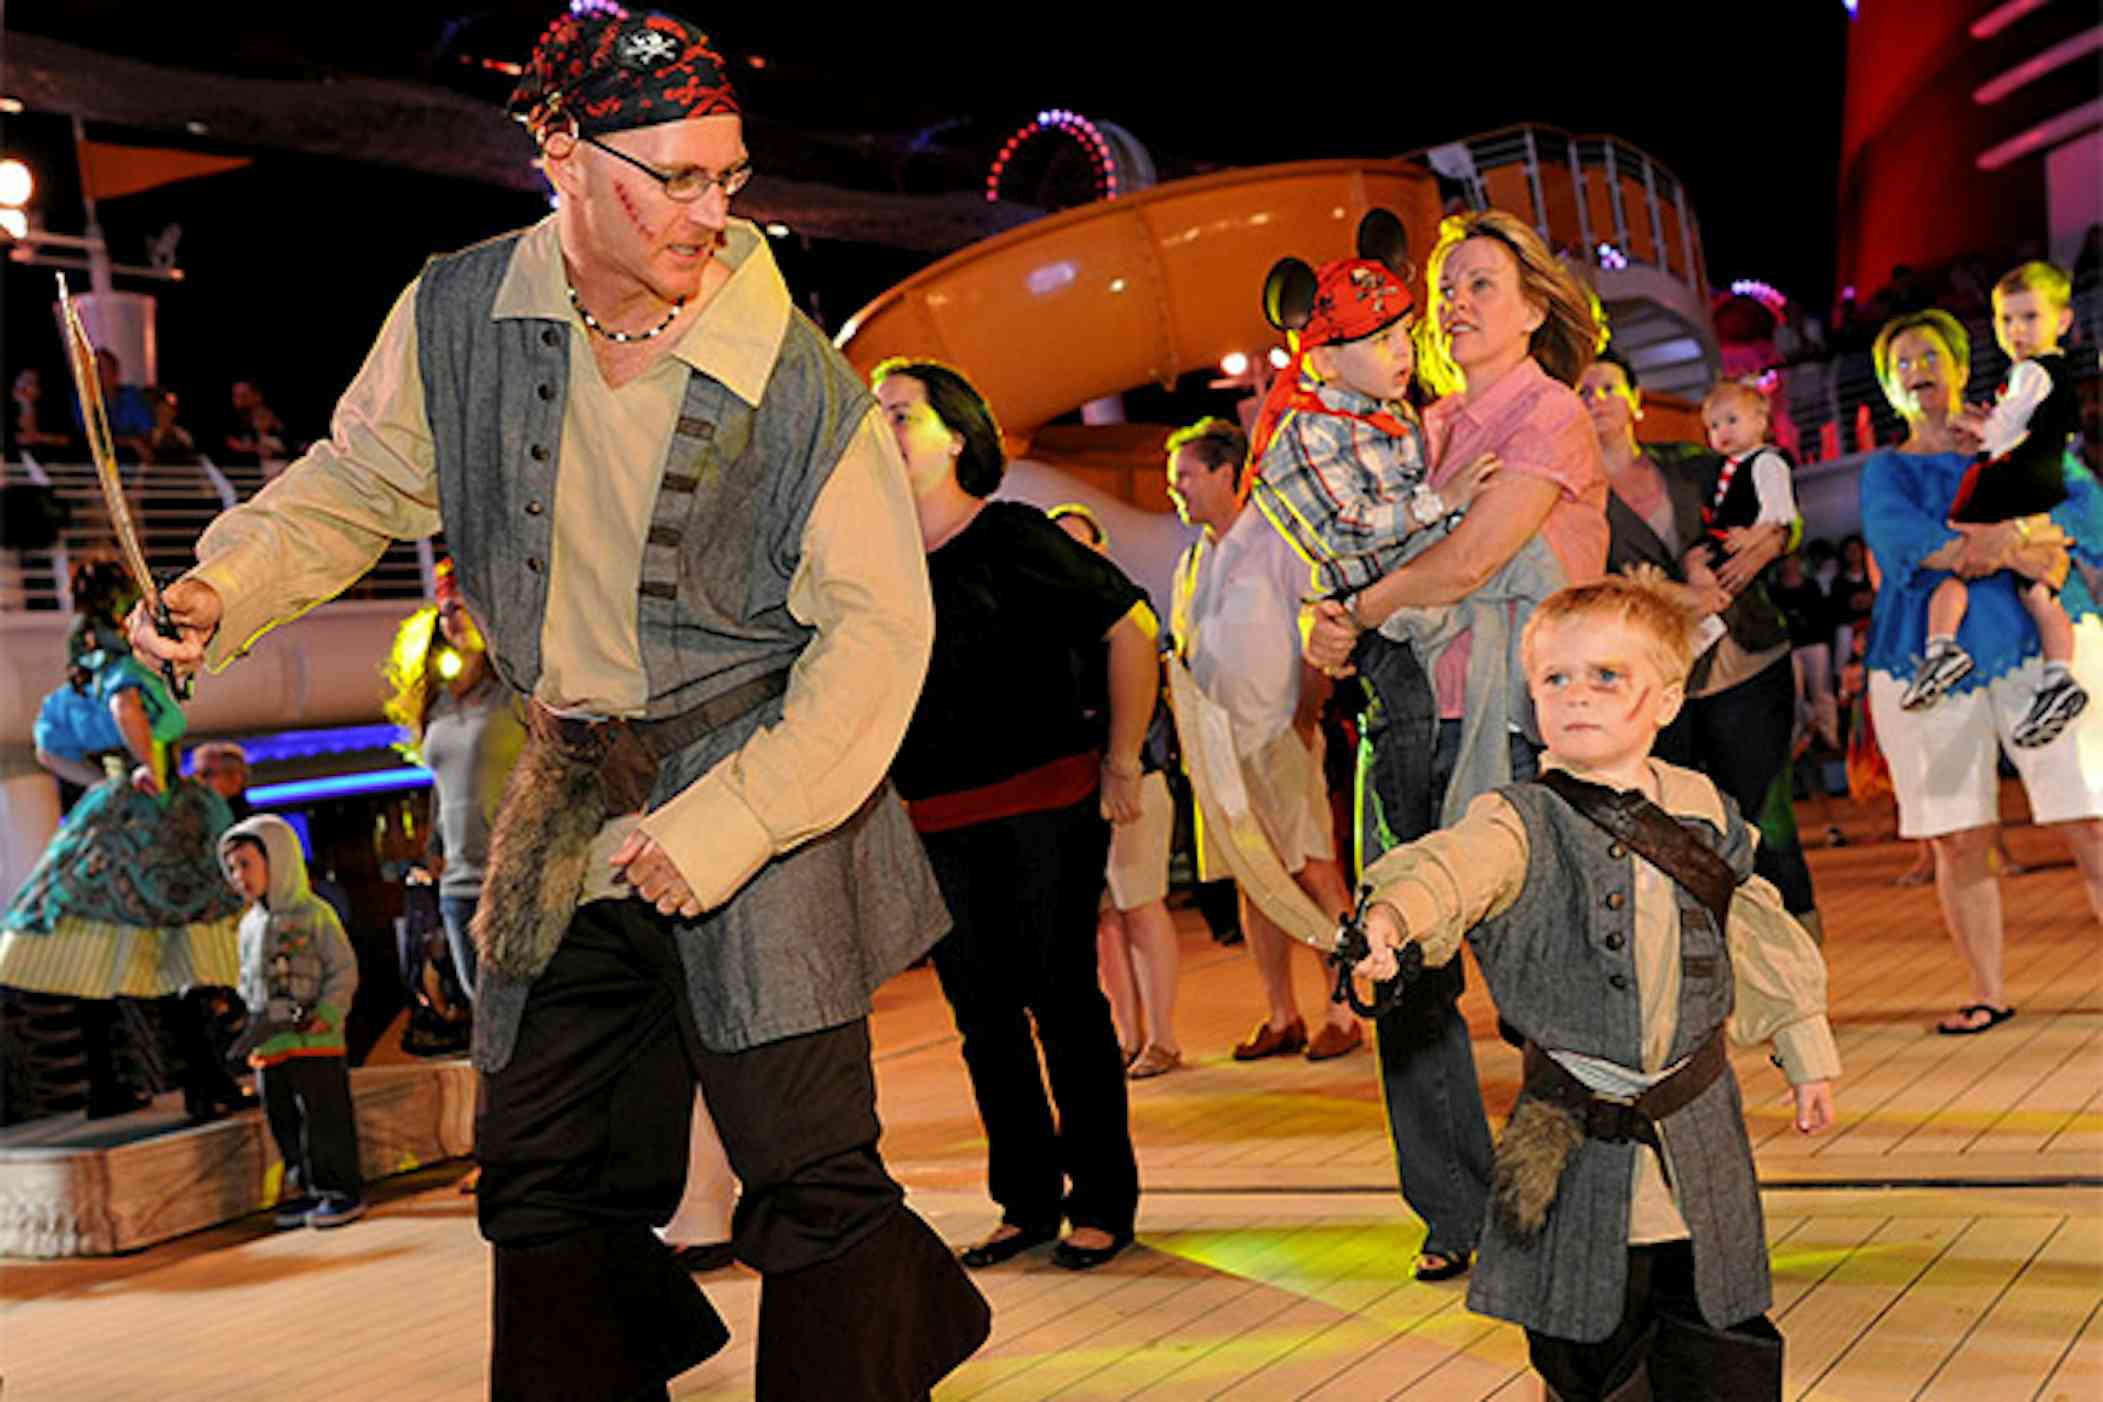 Pirate Night on a Disney Cruise - Plowing Through Life